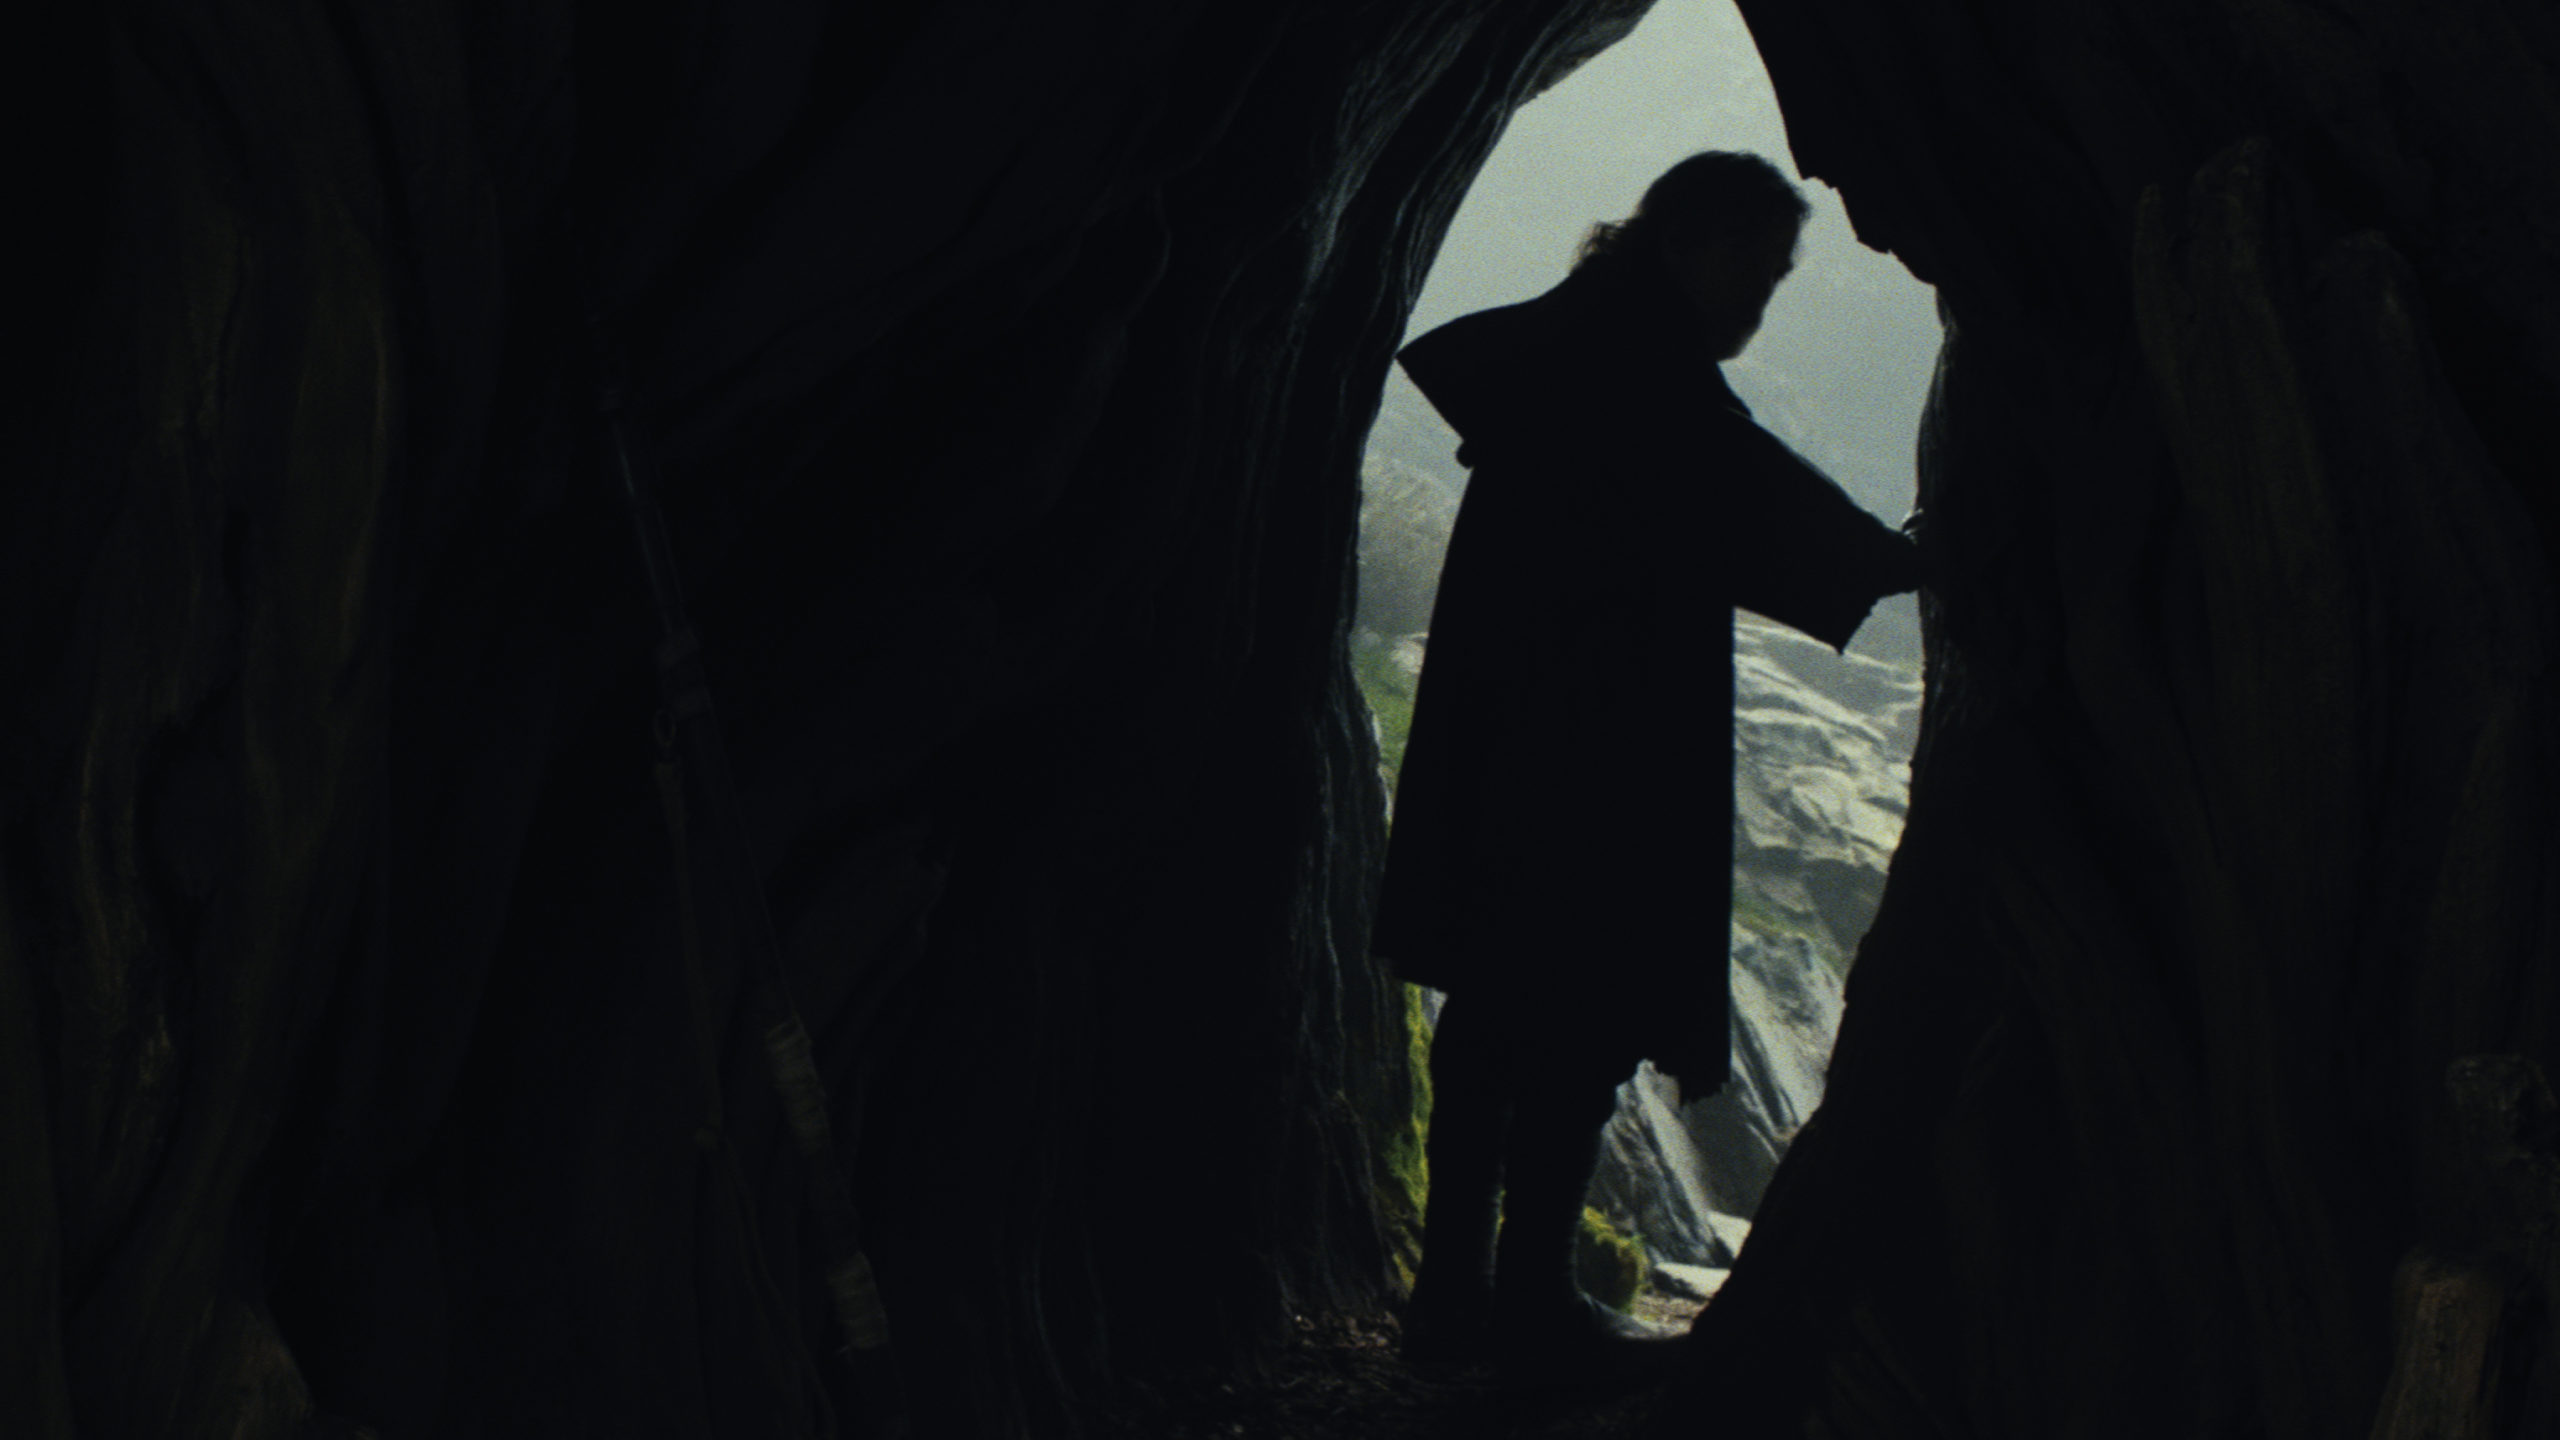 The First Details From Star Wars: The Last Jedi’s Deleted Scenes Are Here